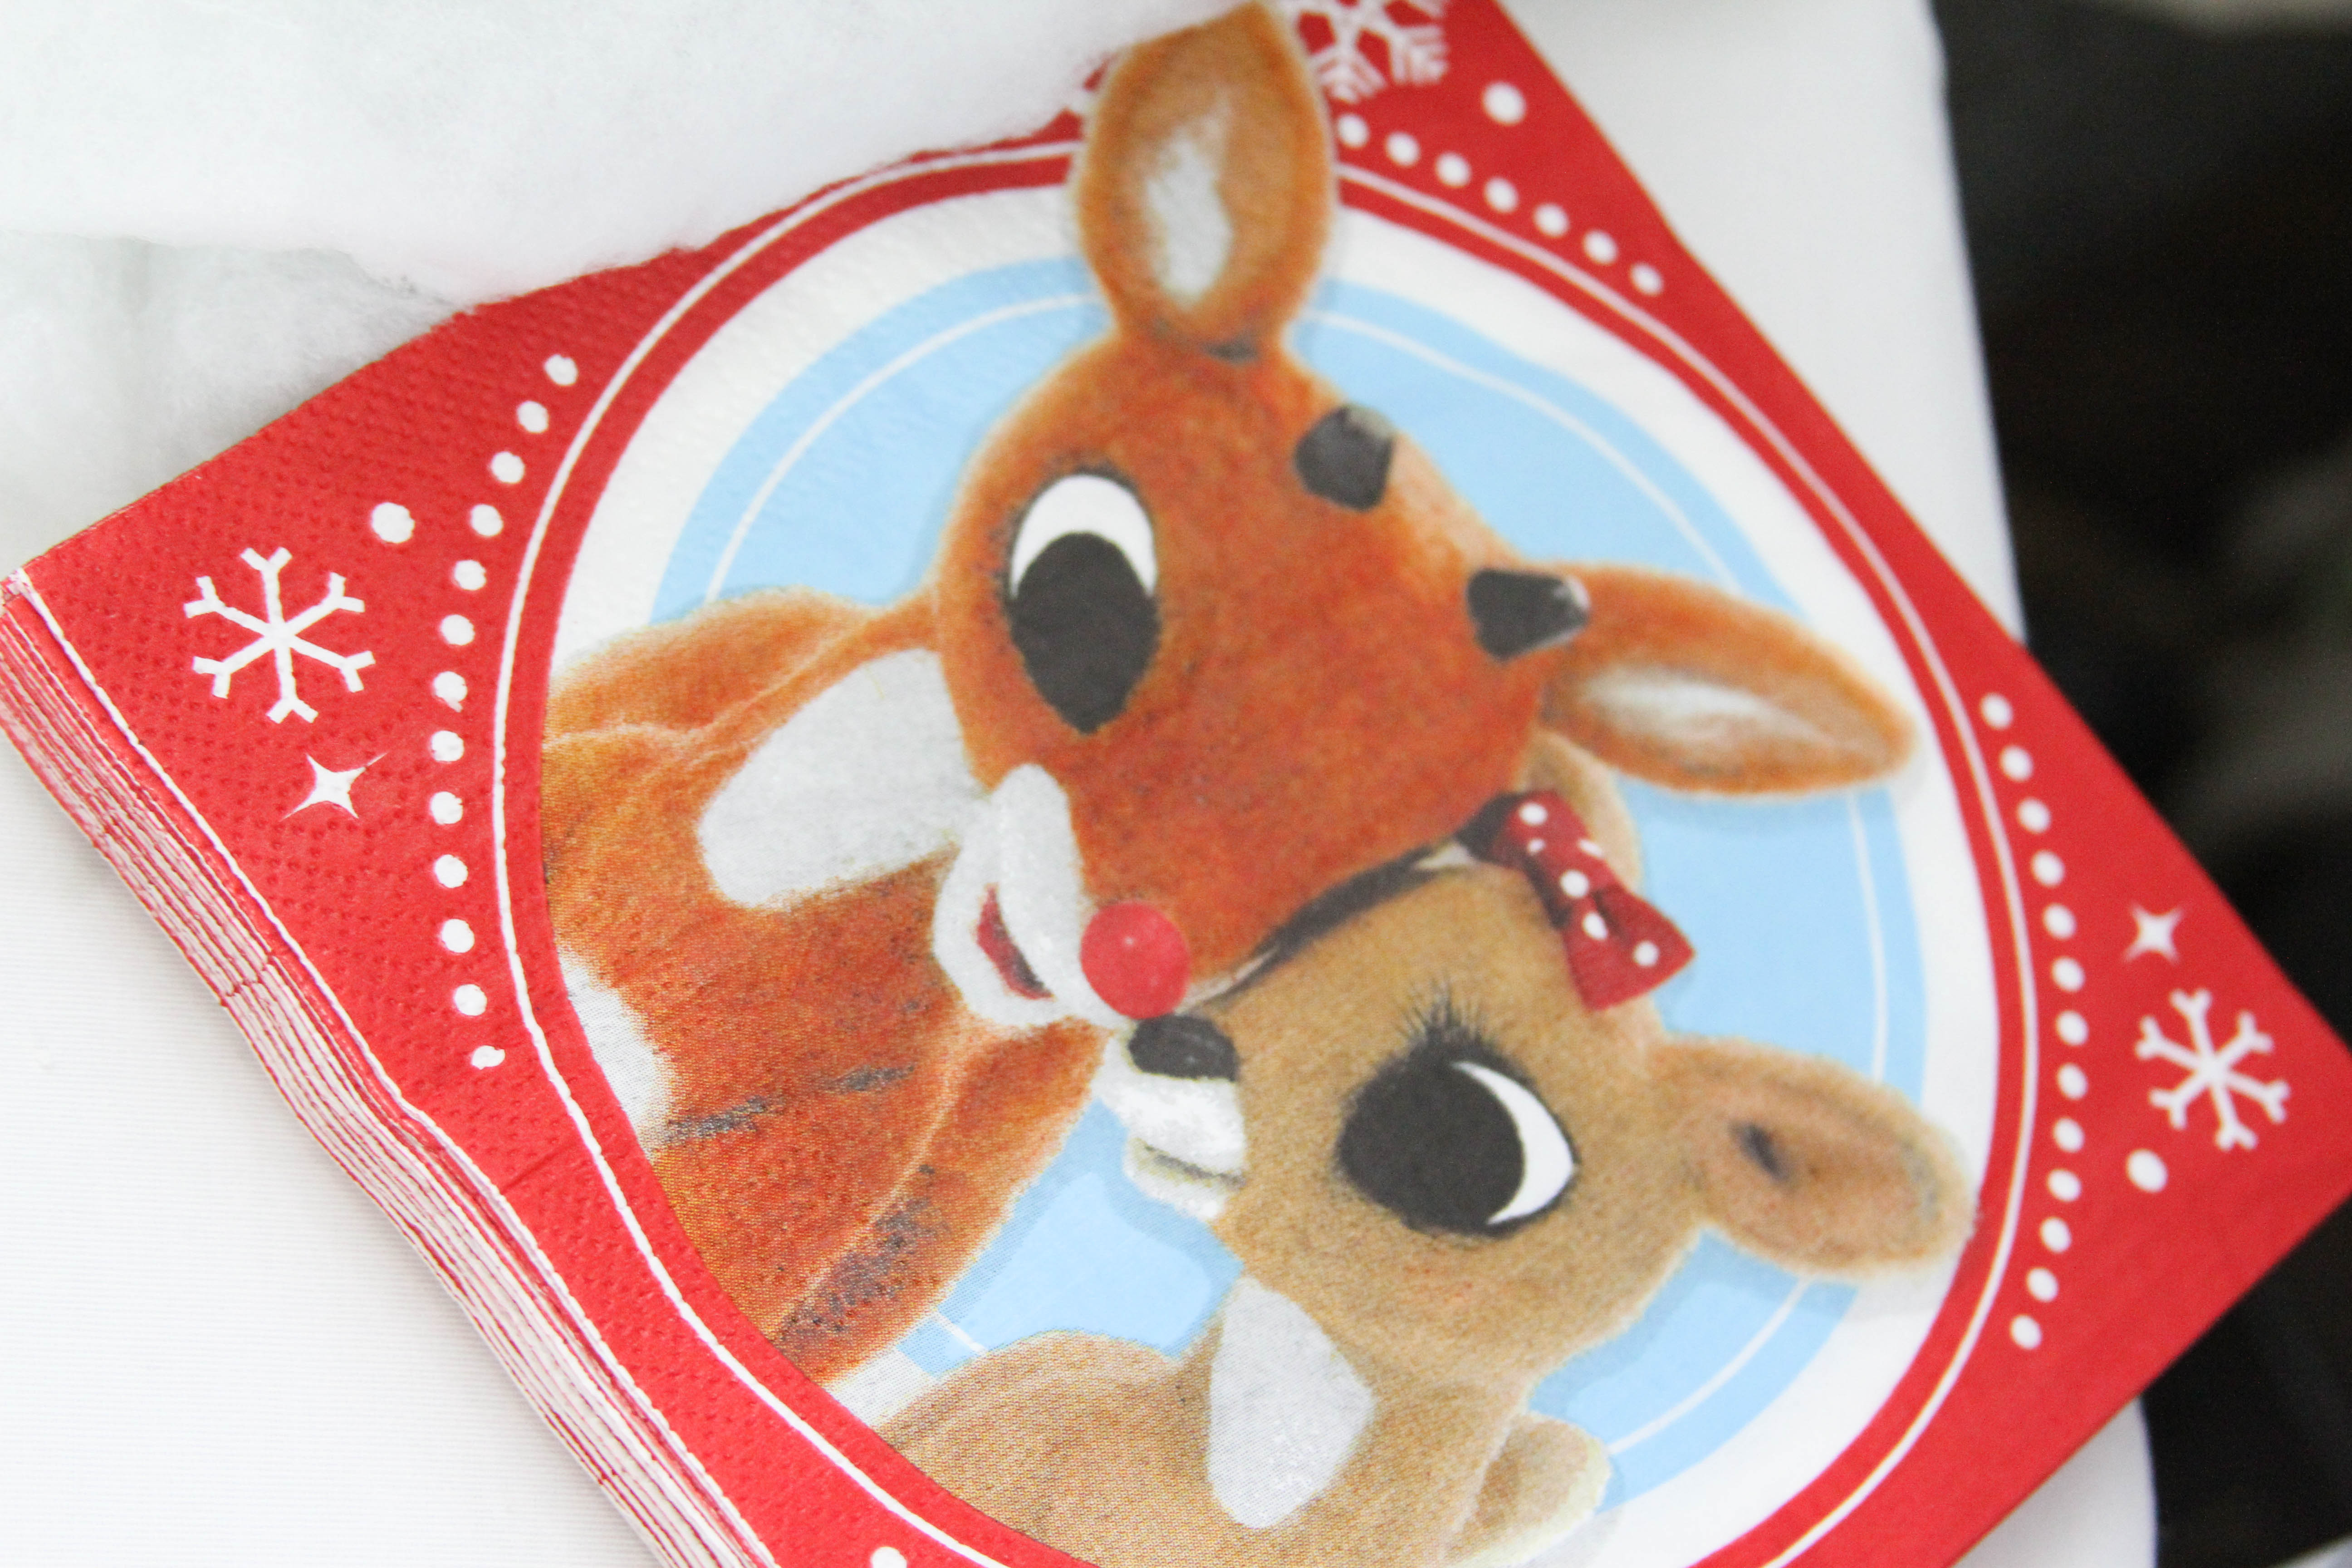 Everyday Party Magazine Rudolph the Red Nosed Reindeer Party